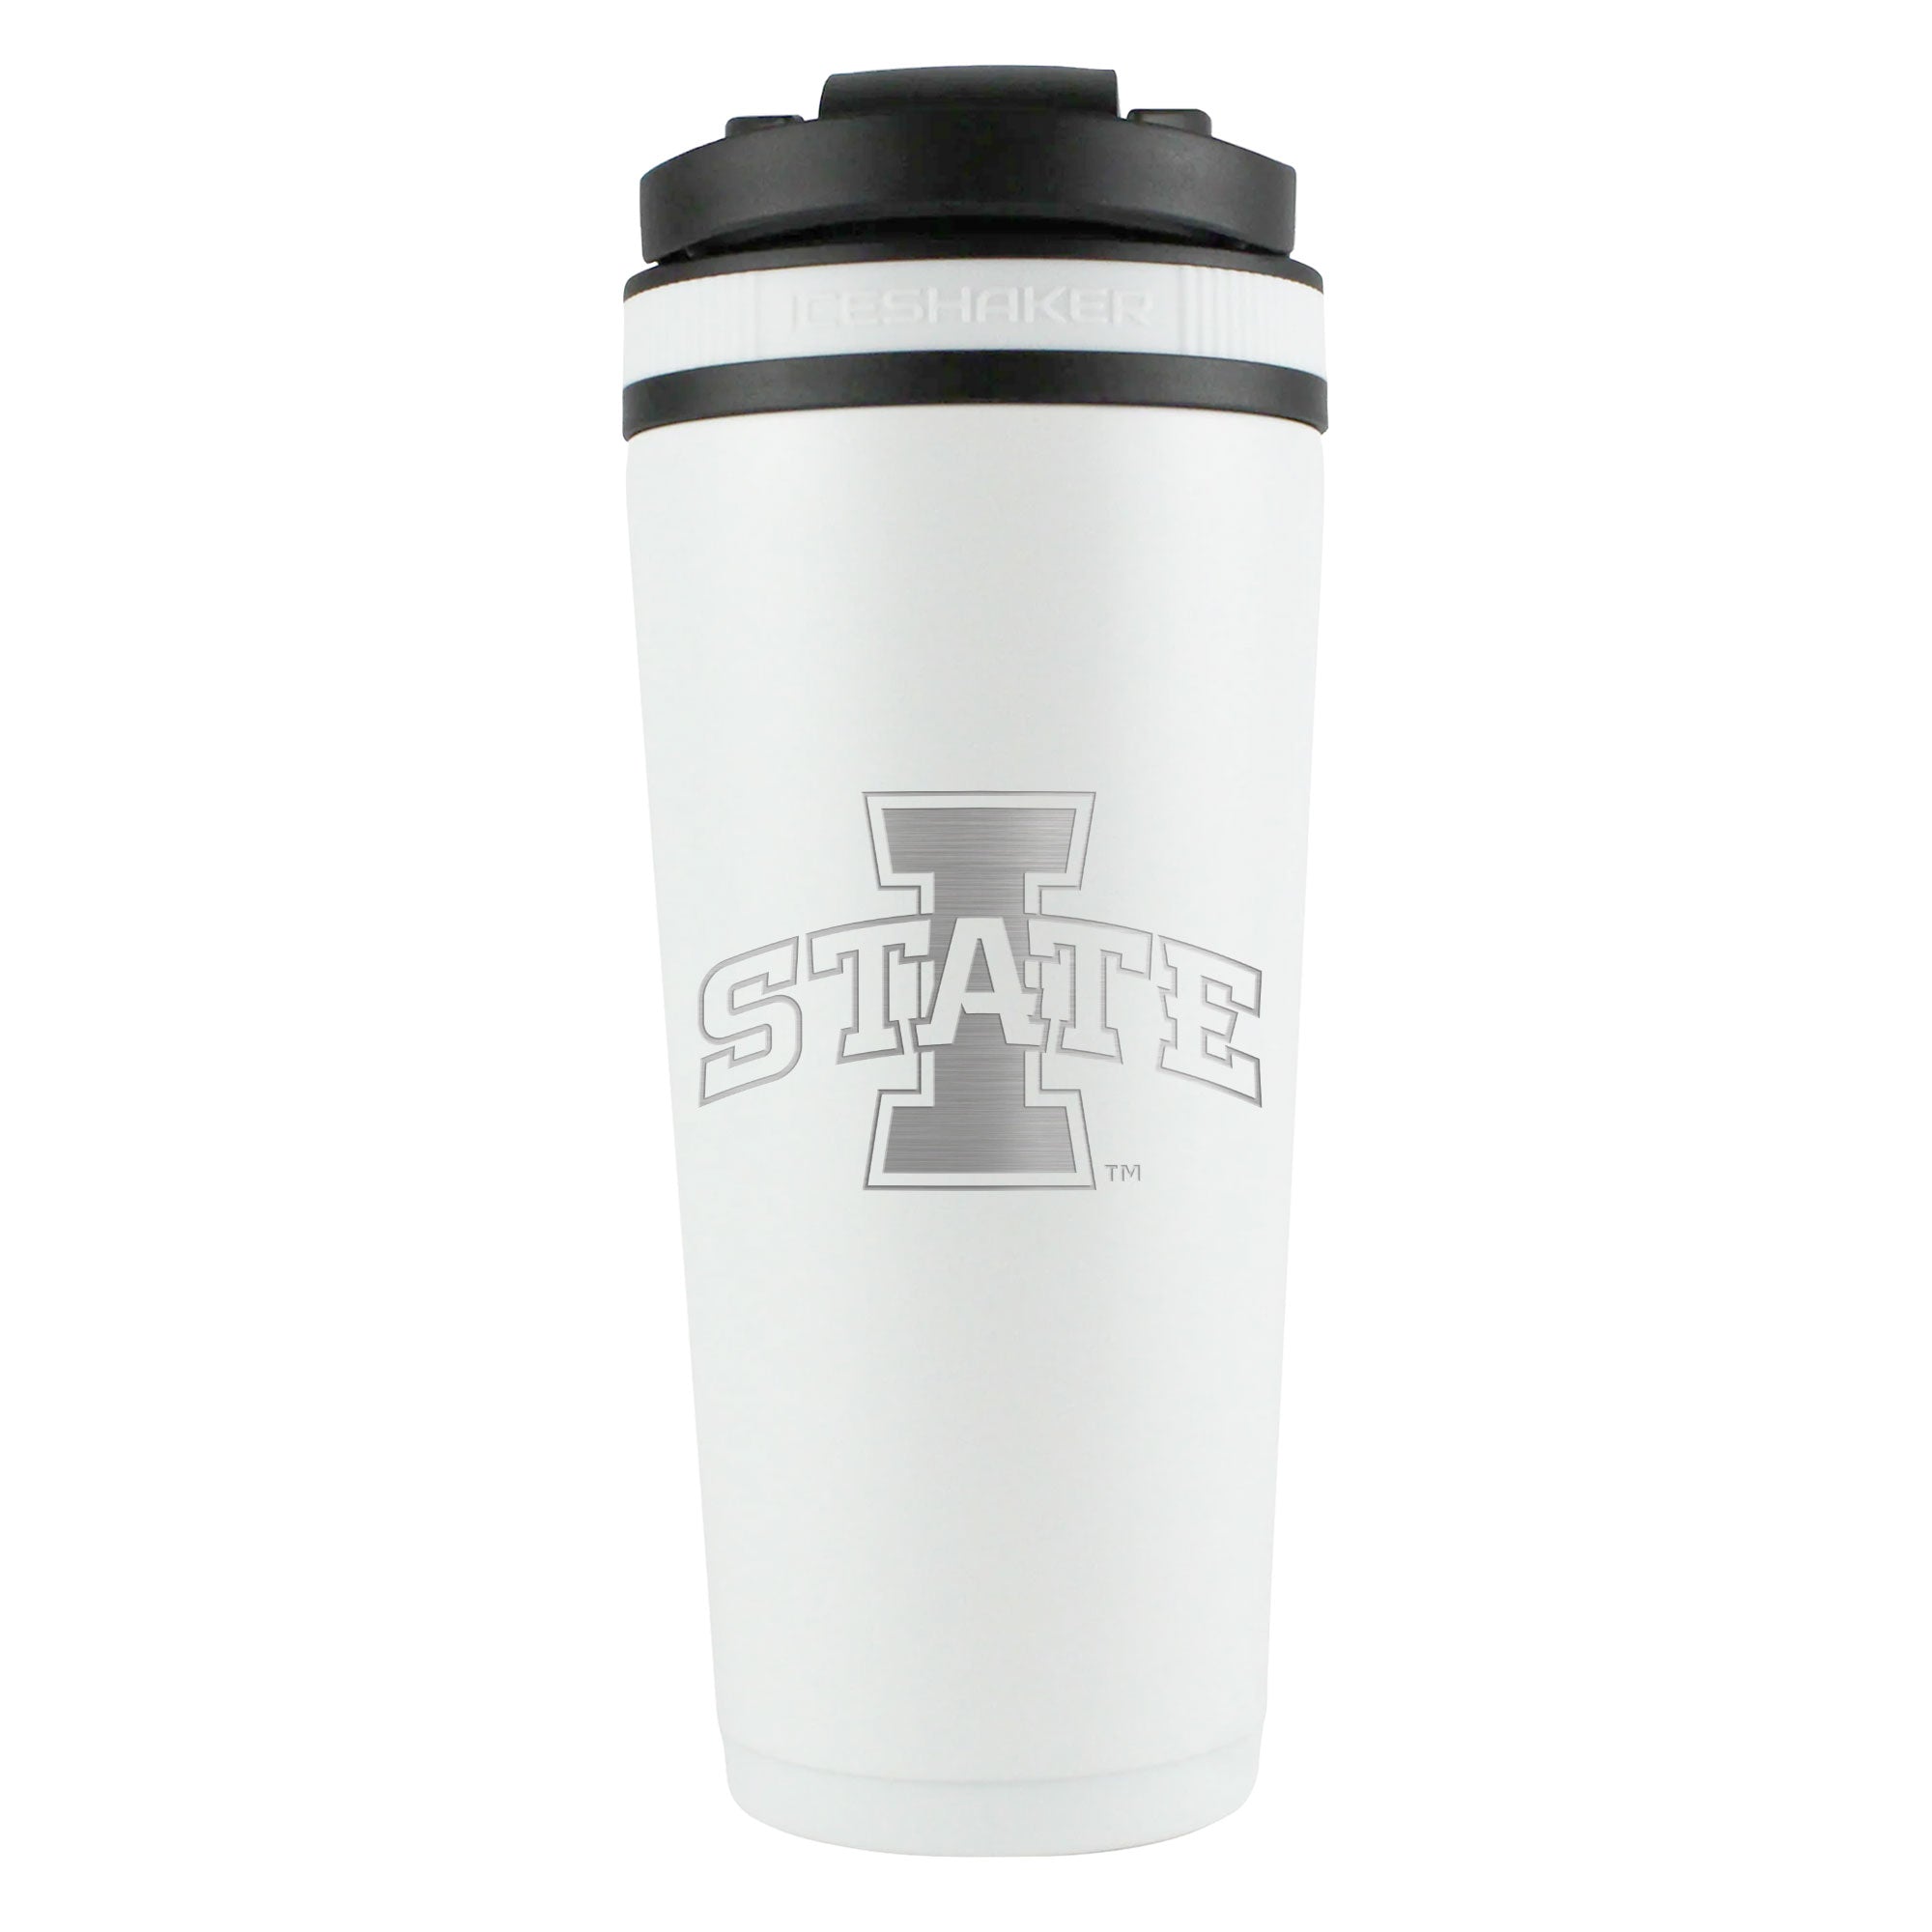 Officially Licensed Iowa State University 26oz Ice Shaker - White